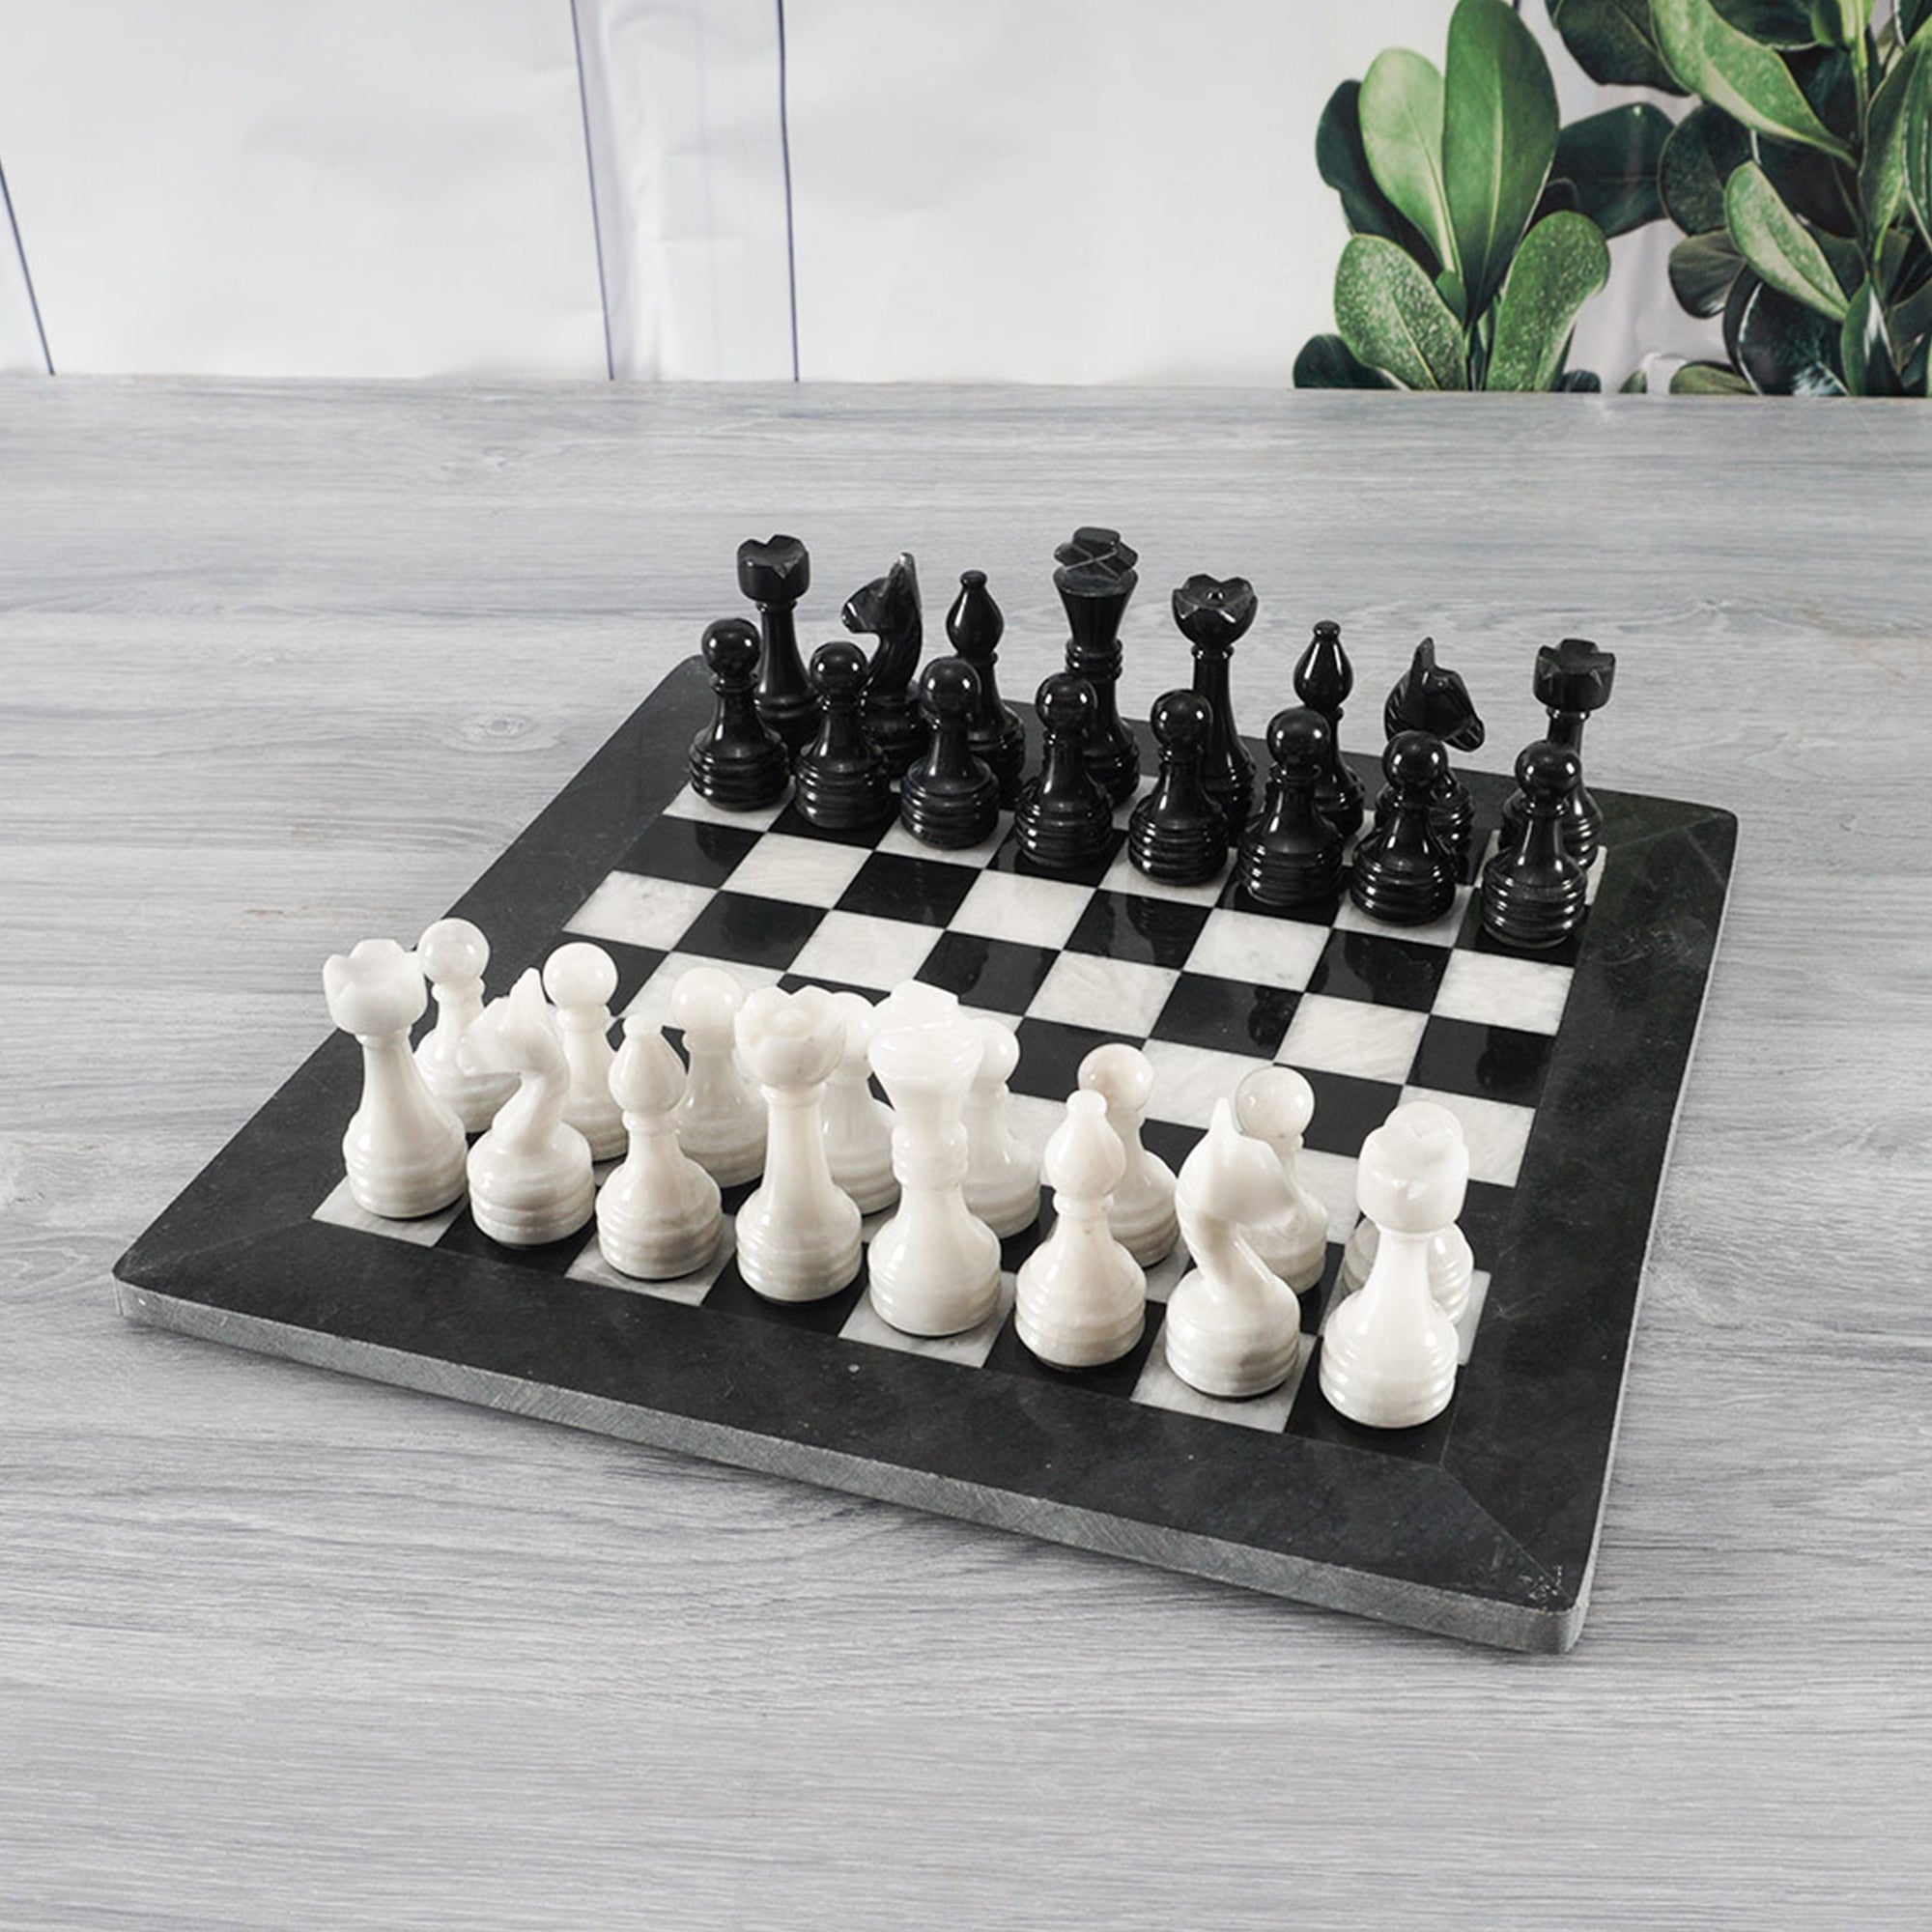 CHESS BOARD Chess board in ceramic, black and white with…